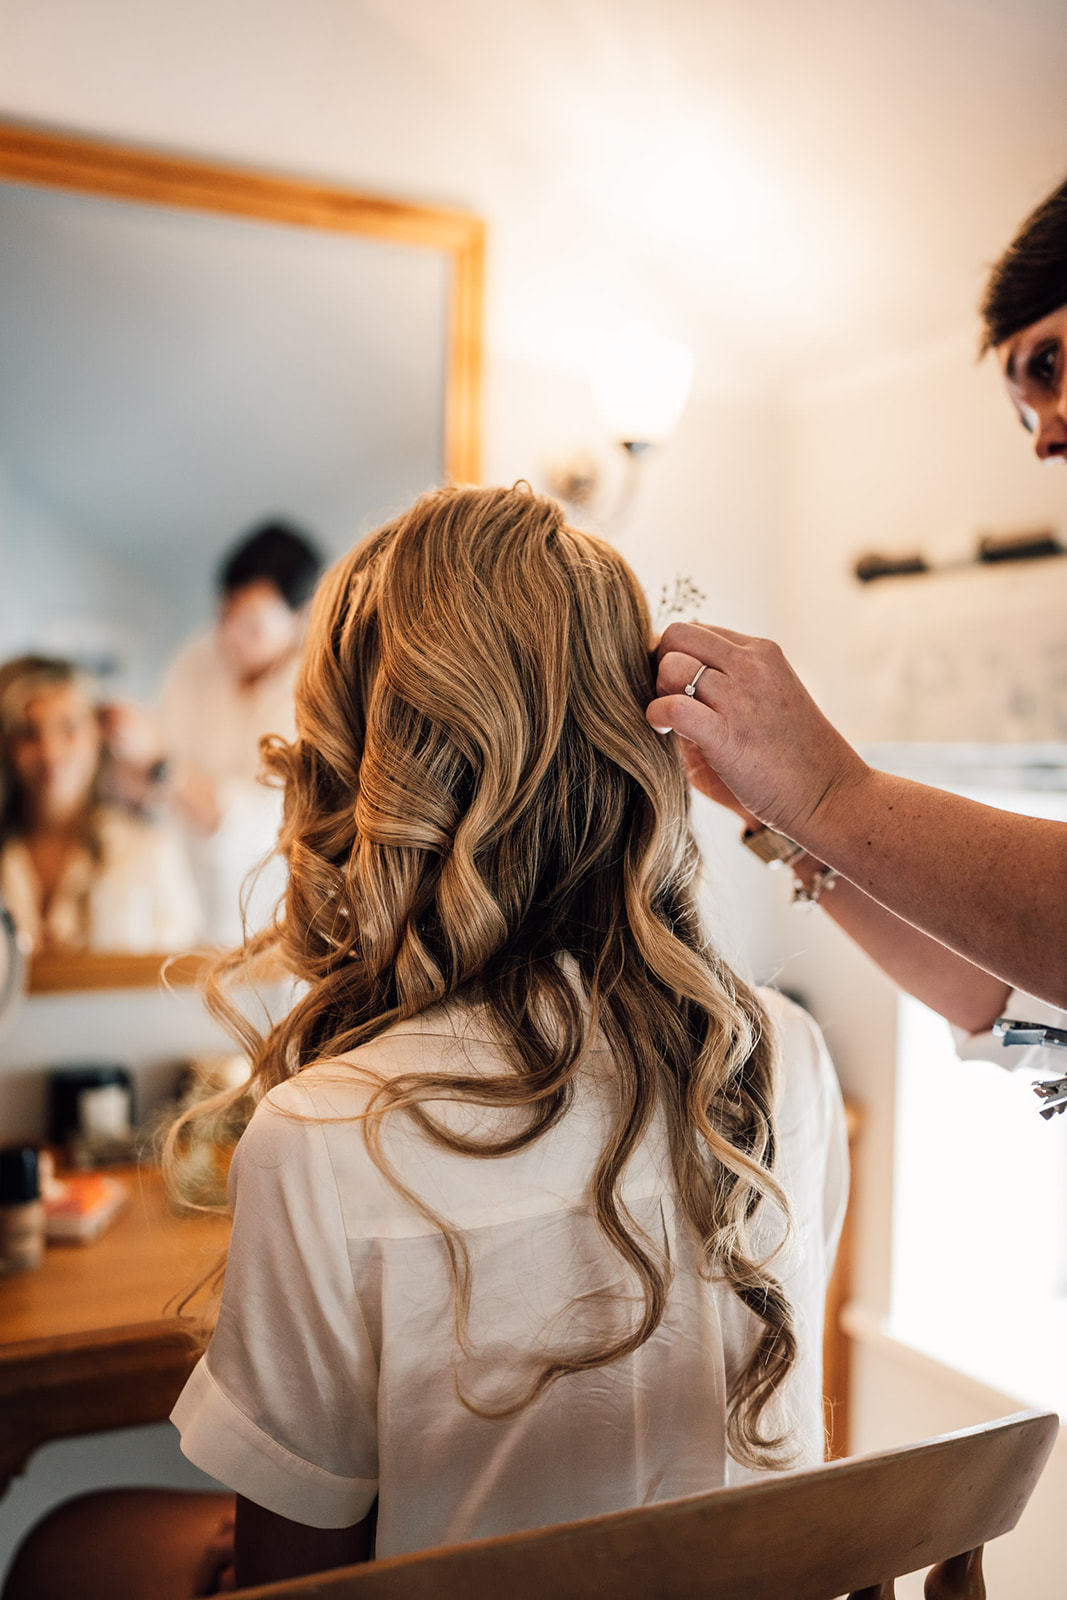 The bride having her hair styled